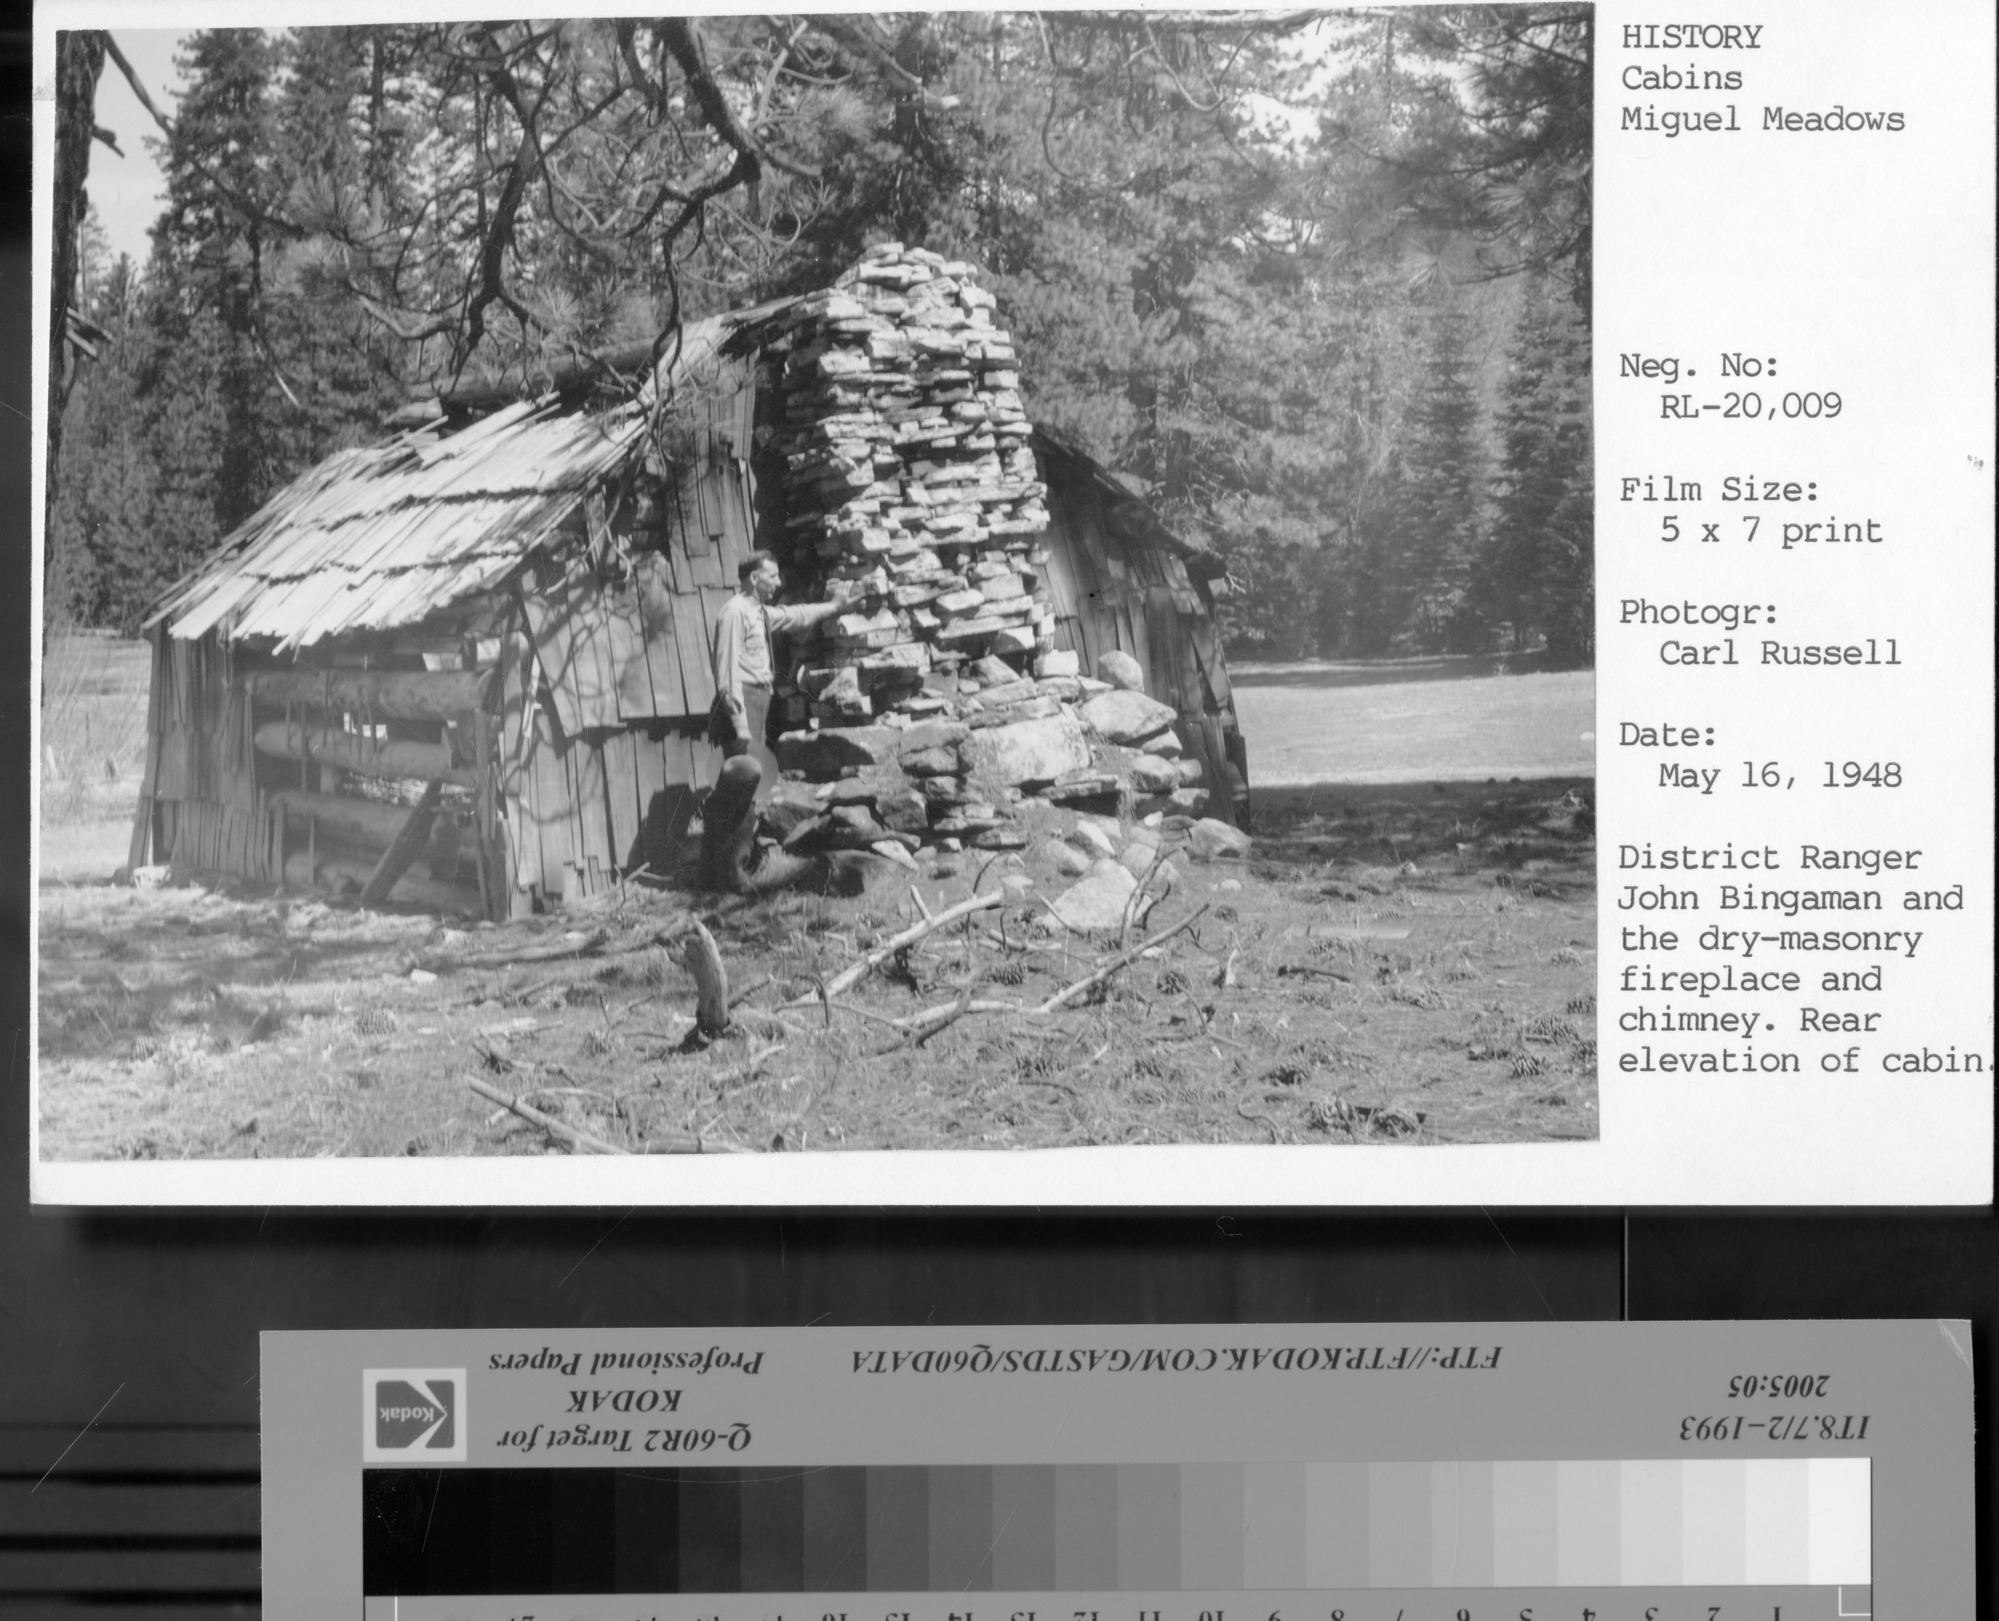 District Ranger John Bingaman and the dry-masonry fireplace and chimney. Rear elevation of cabin. [on Photo card]: No negative. Digital scan of a 5 x 7 print assigned to this number. June, 2011.